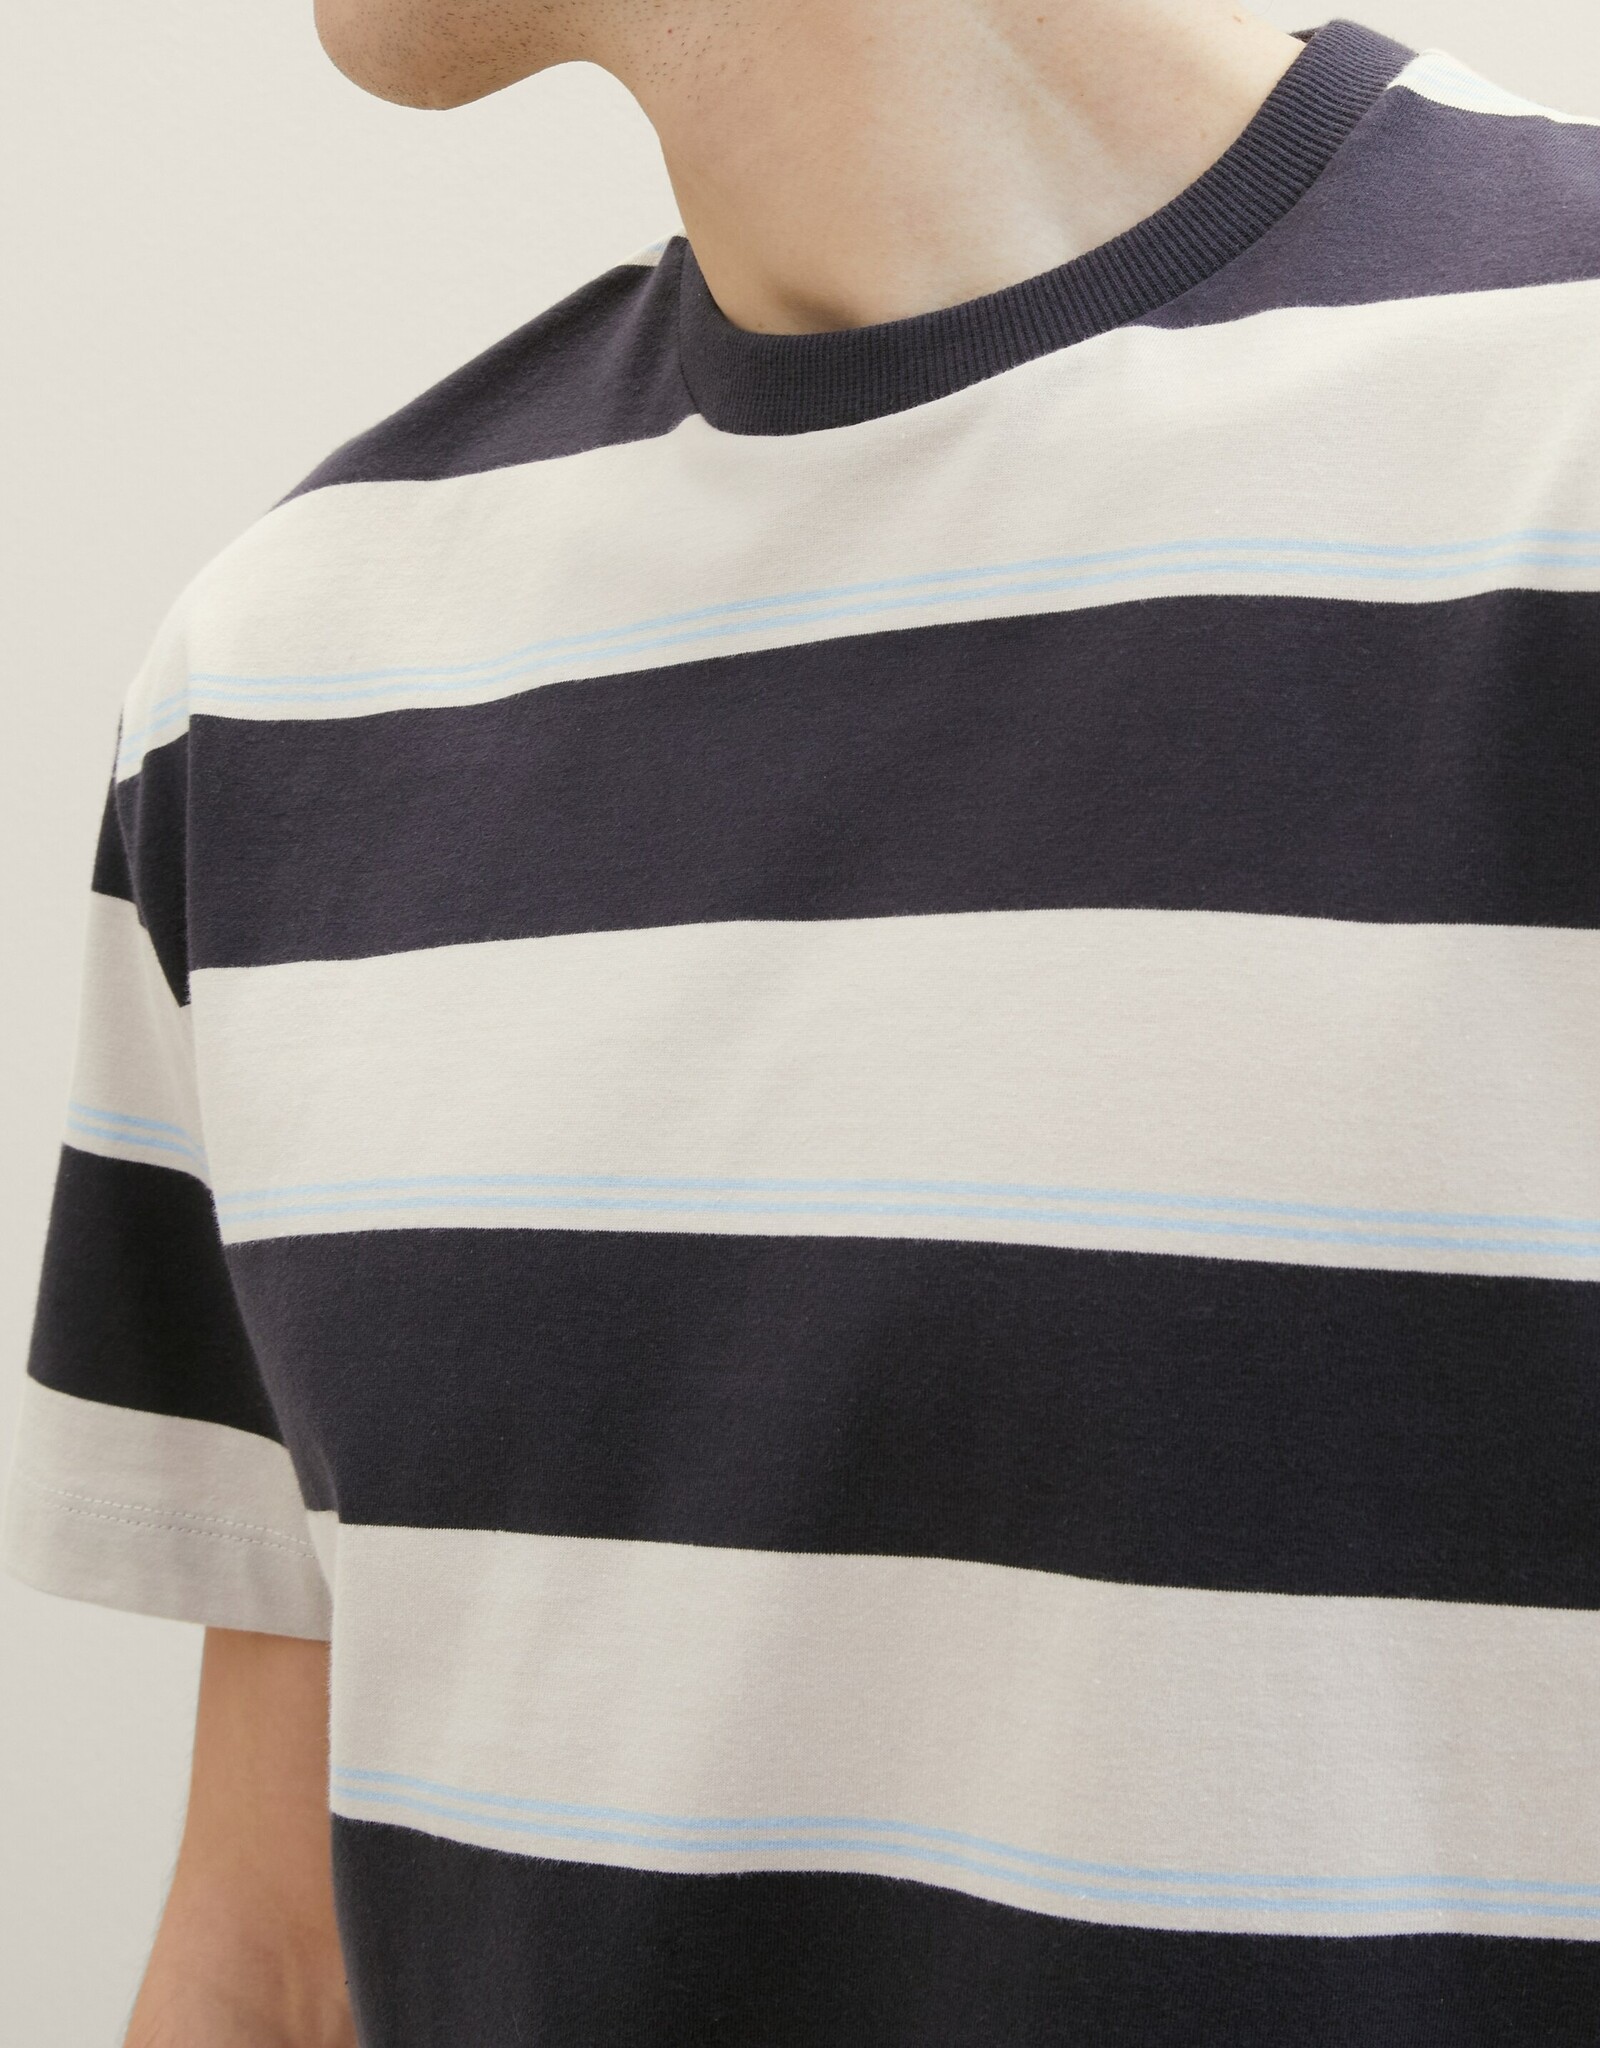 Tom Tailor Mens Relaxed Striped T-Shirt